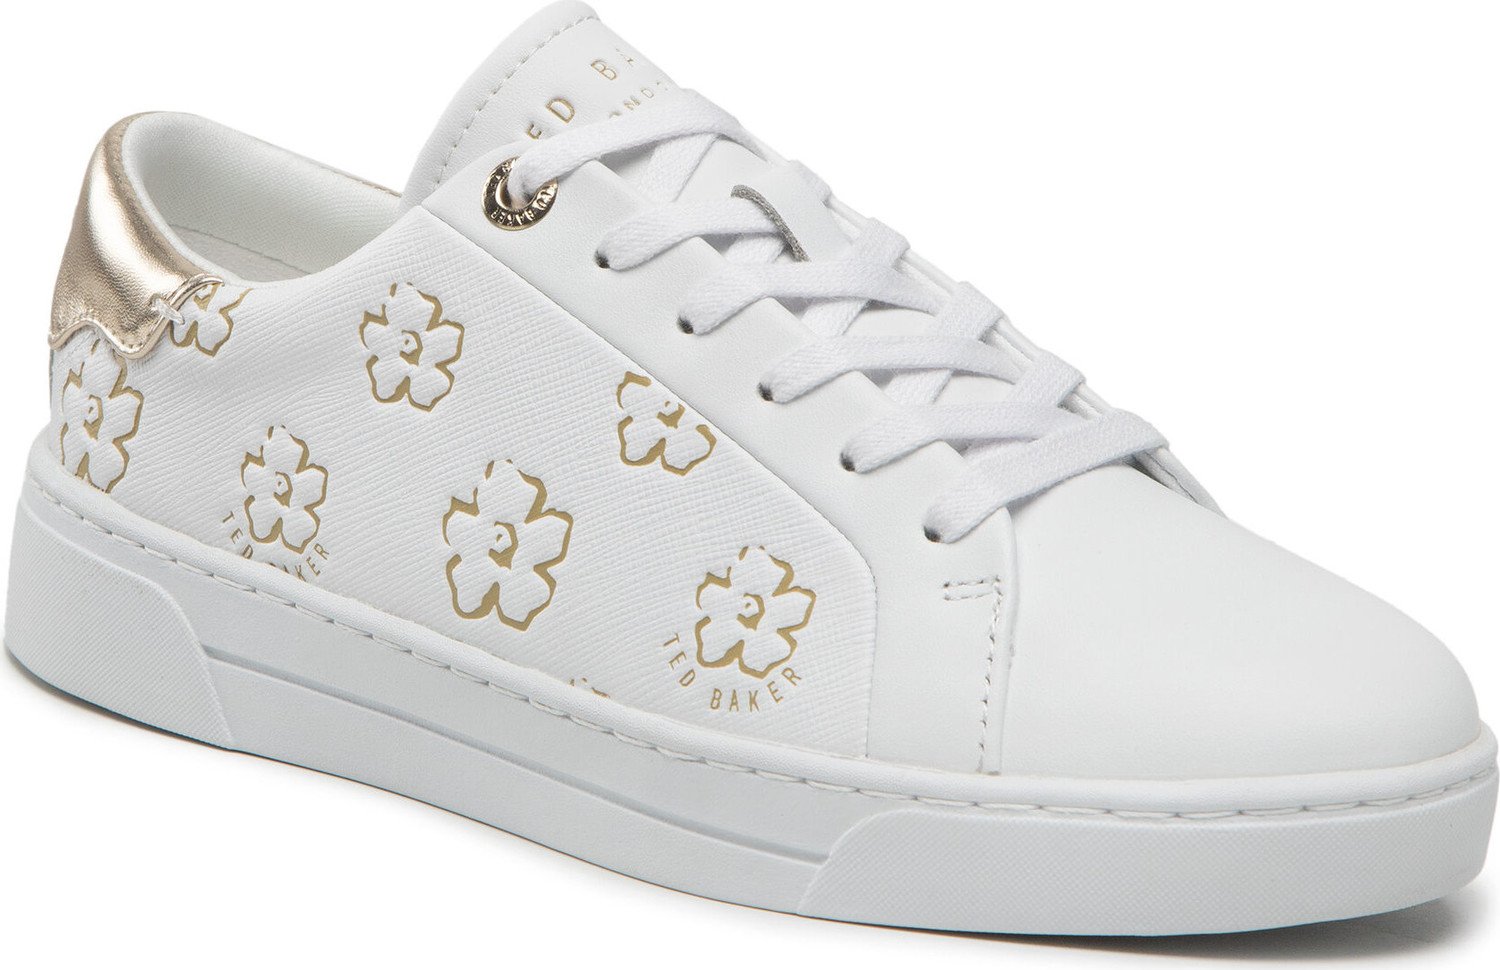 Sneakersy Ted Baker Taily 257319 White/Gold